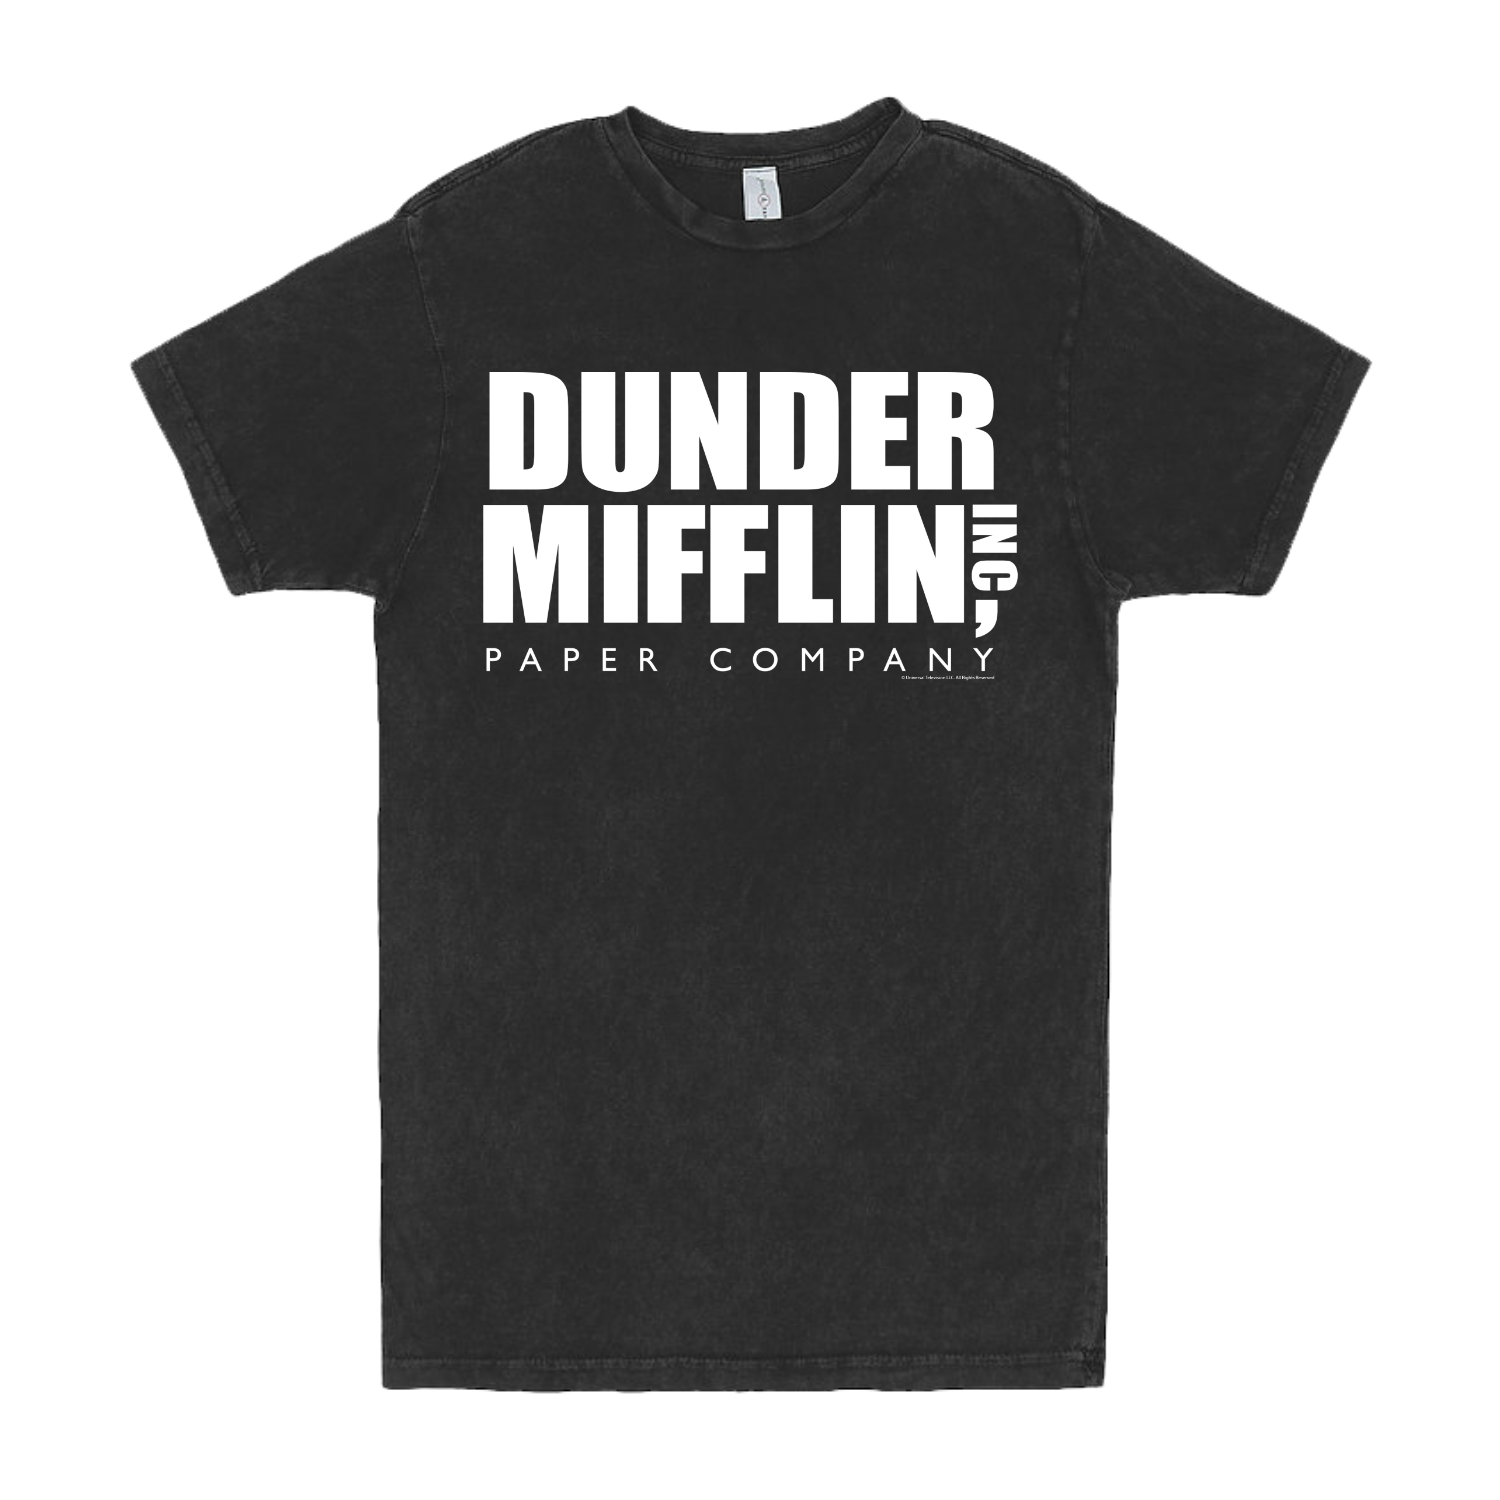 Dunder Mifflin T-shirt The Office Gift Dwight Schrute Shirt Funny TV Show T  Shirt Dunder Mifflin Paper Company Unisex Tees Tops